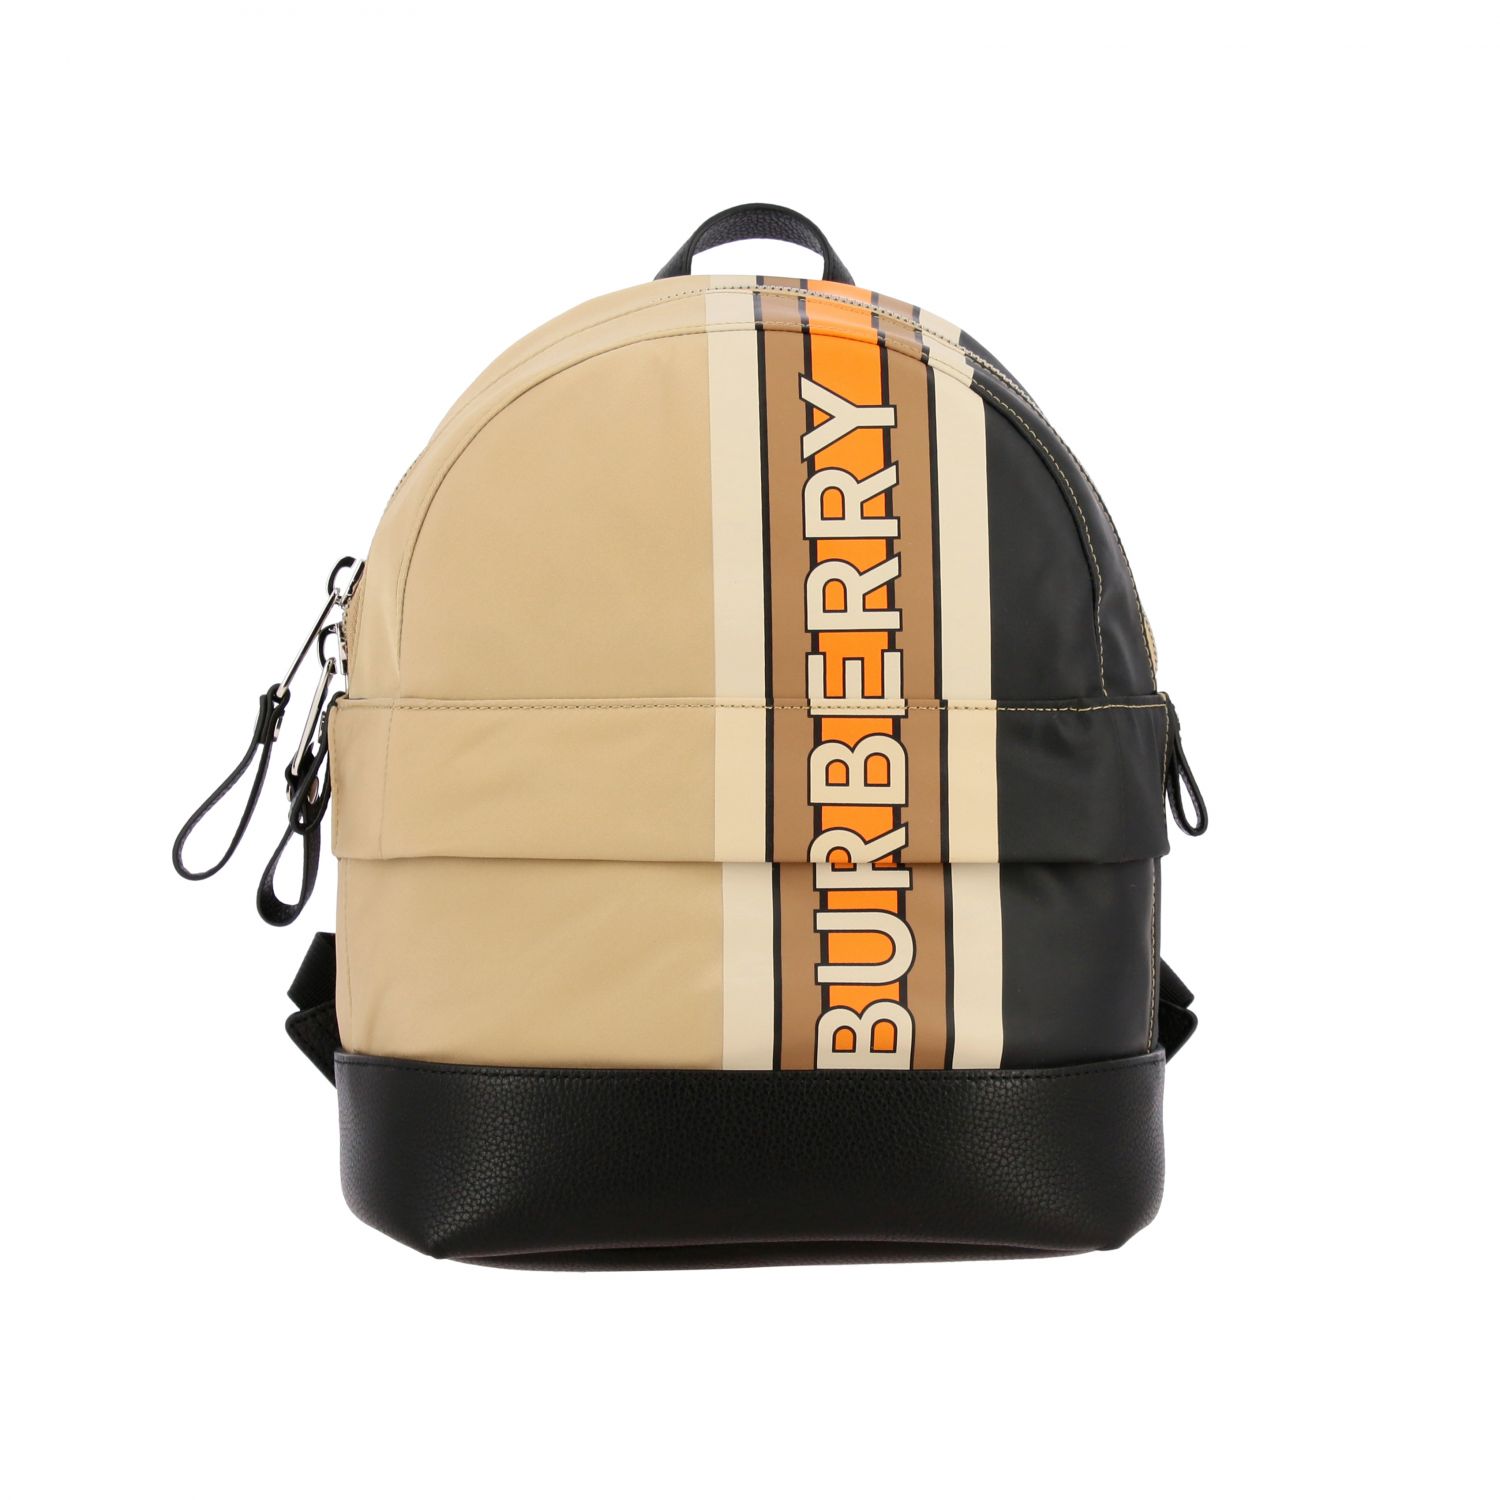 Burberry Outlet: backpack in canvas and leather with logo print | Bag ...